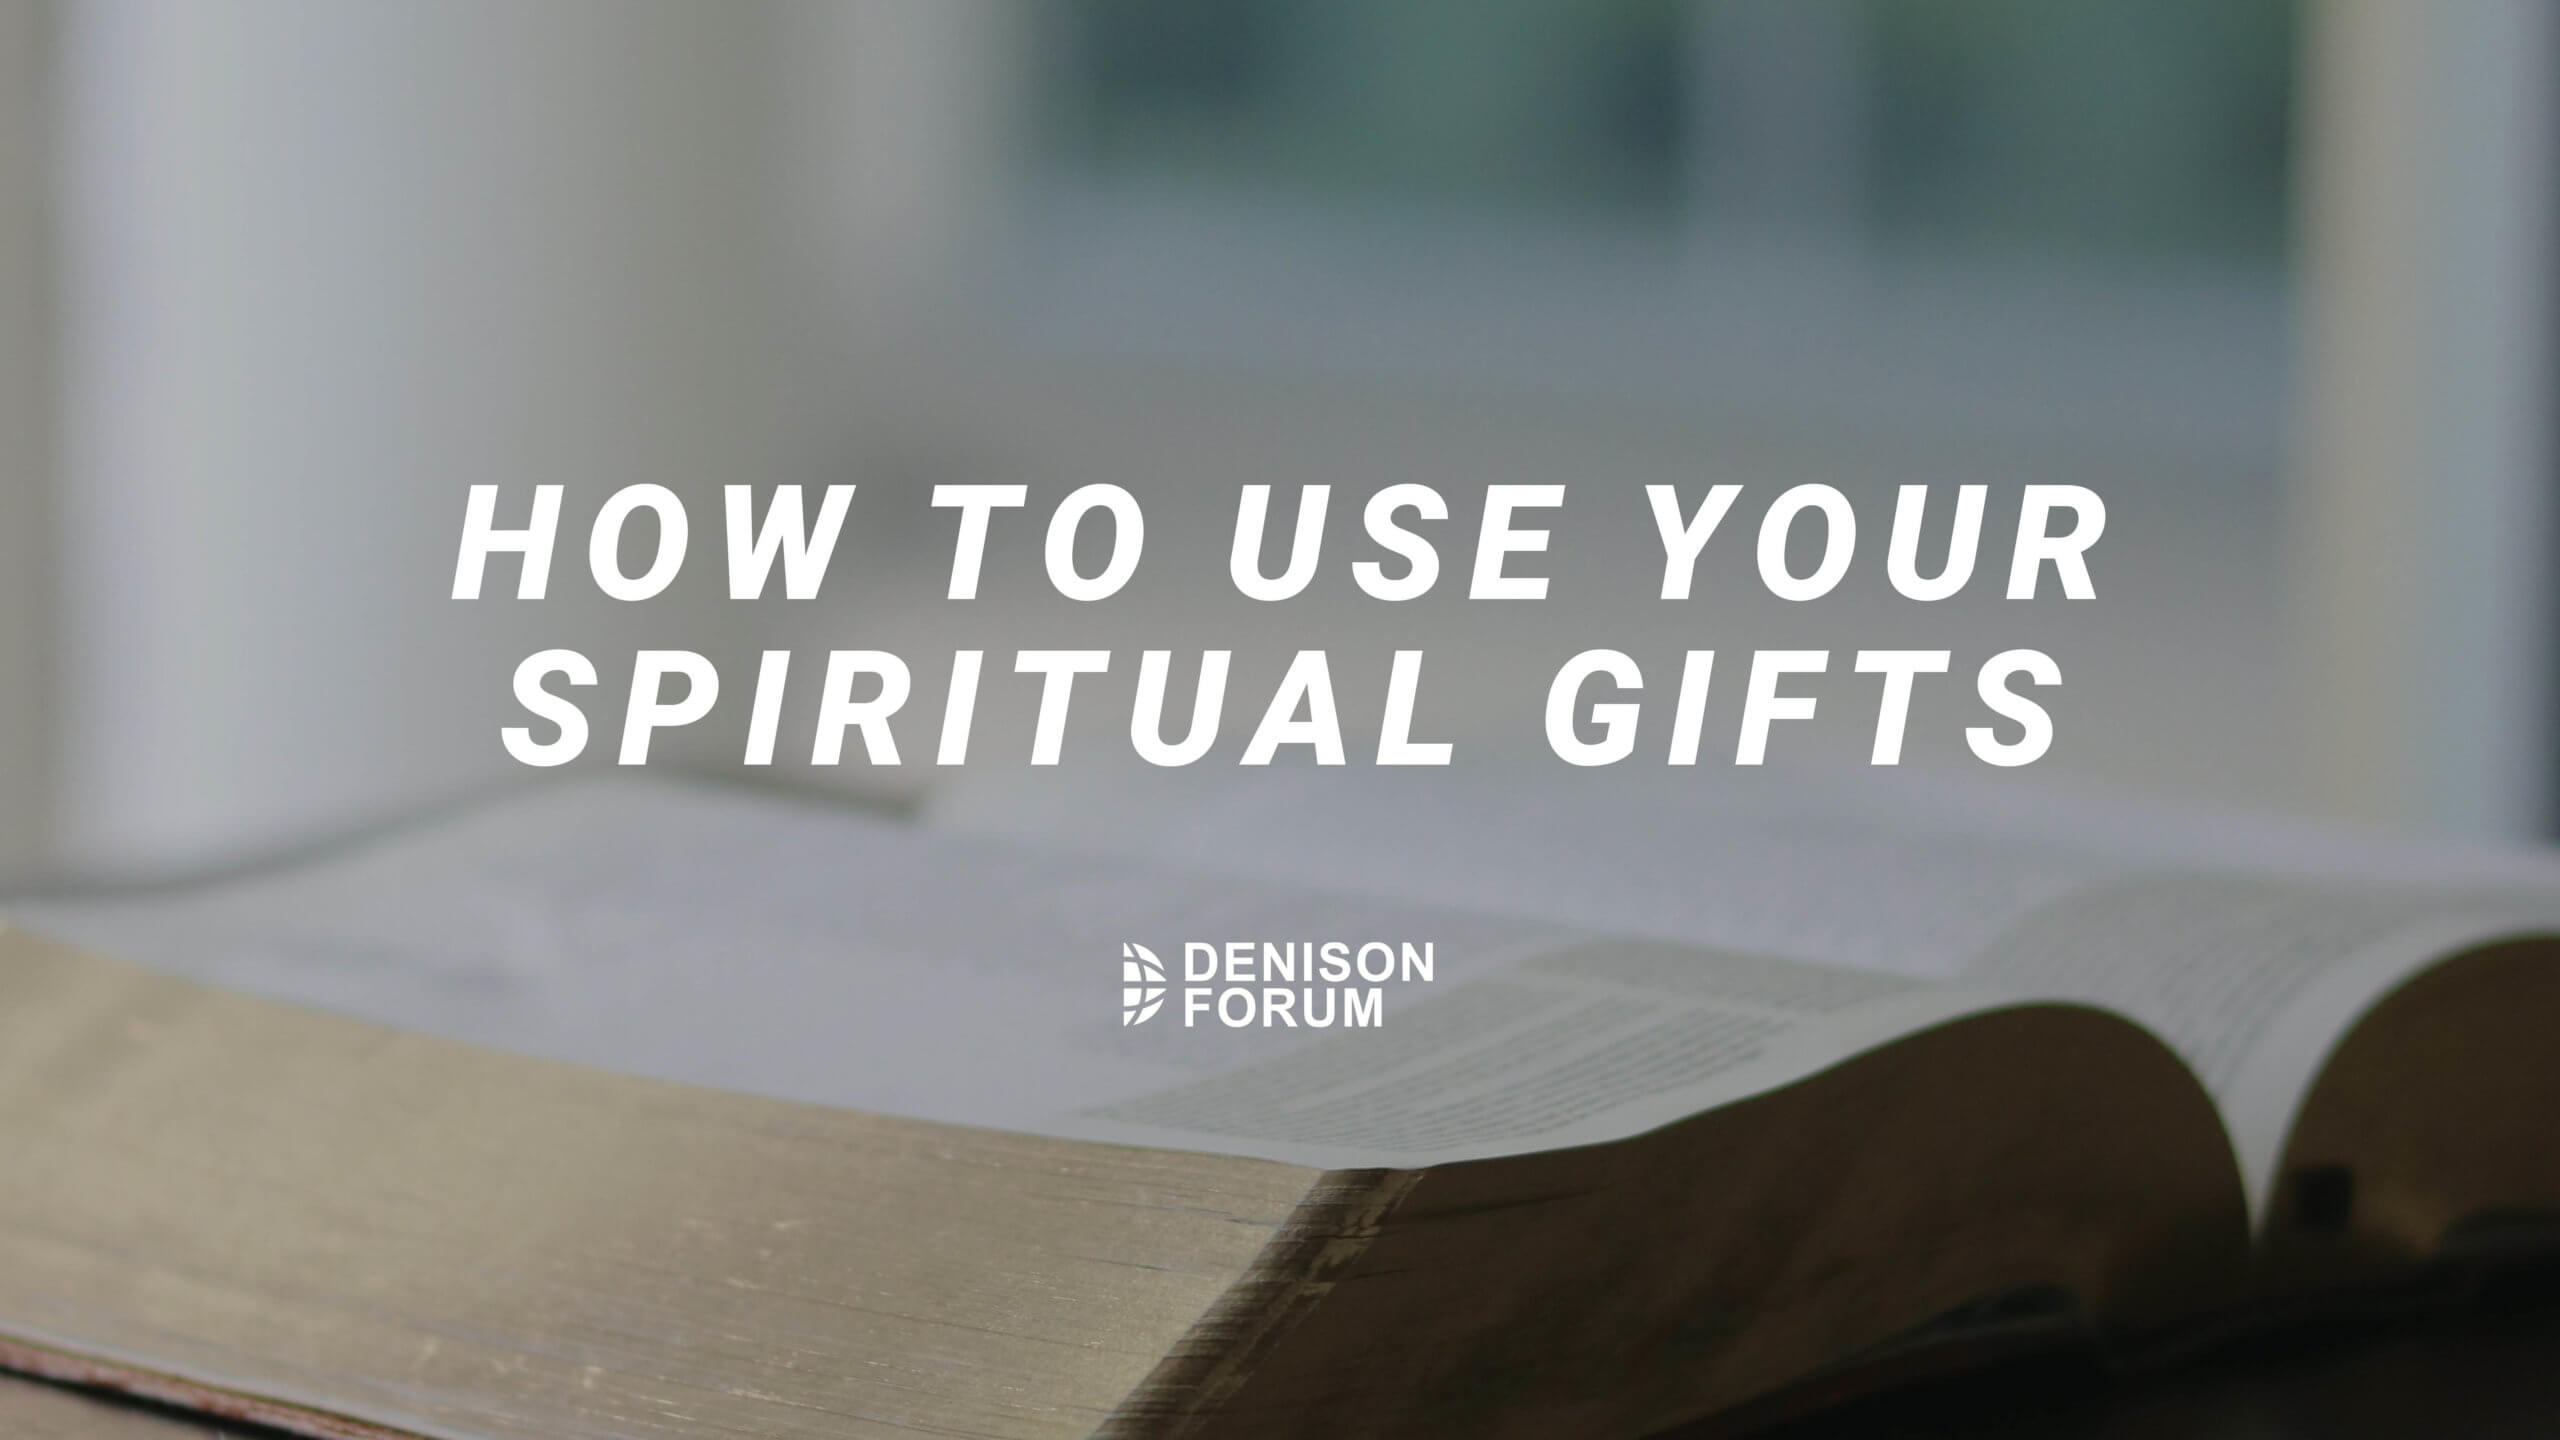 Bible, transposed: "How to use your spiritual gifts"